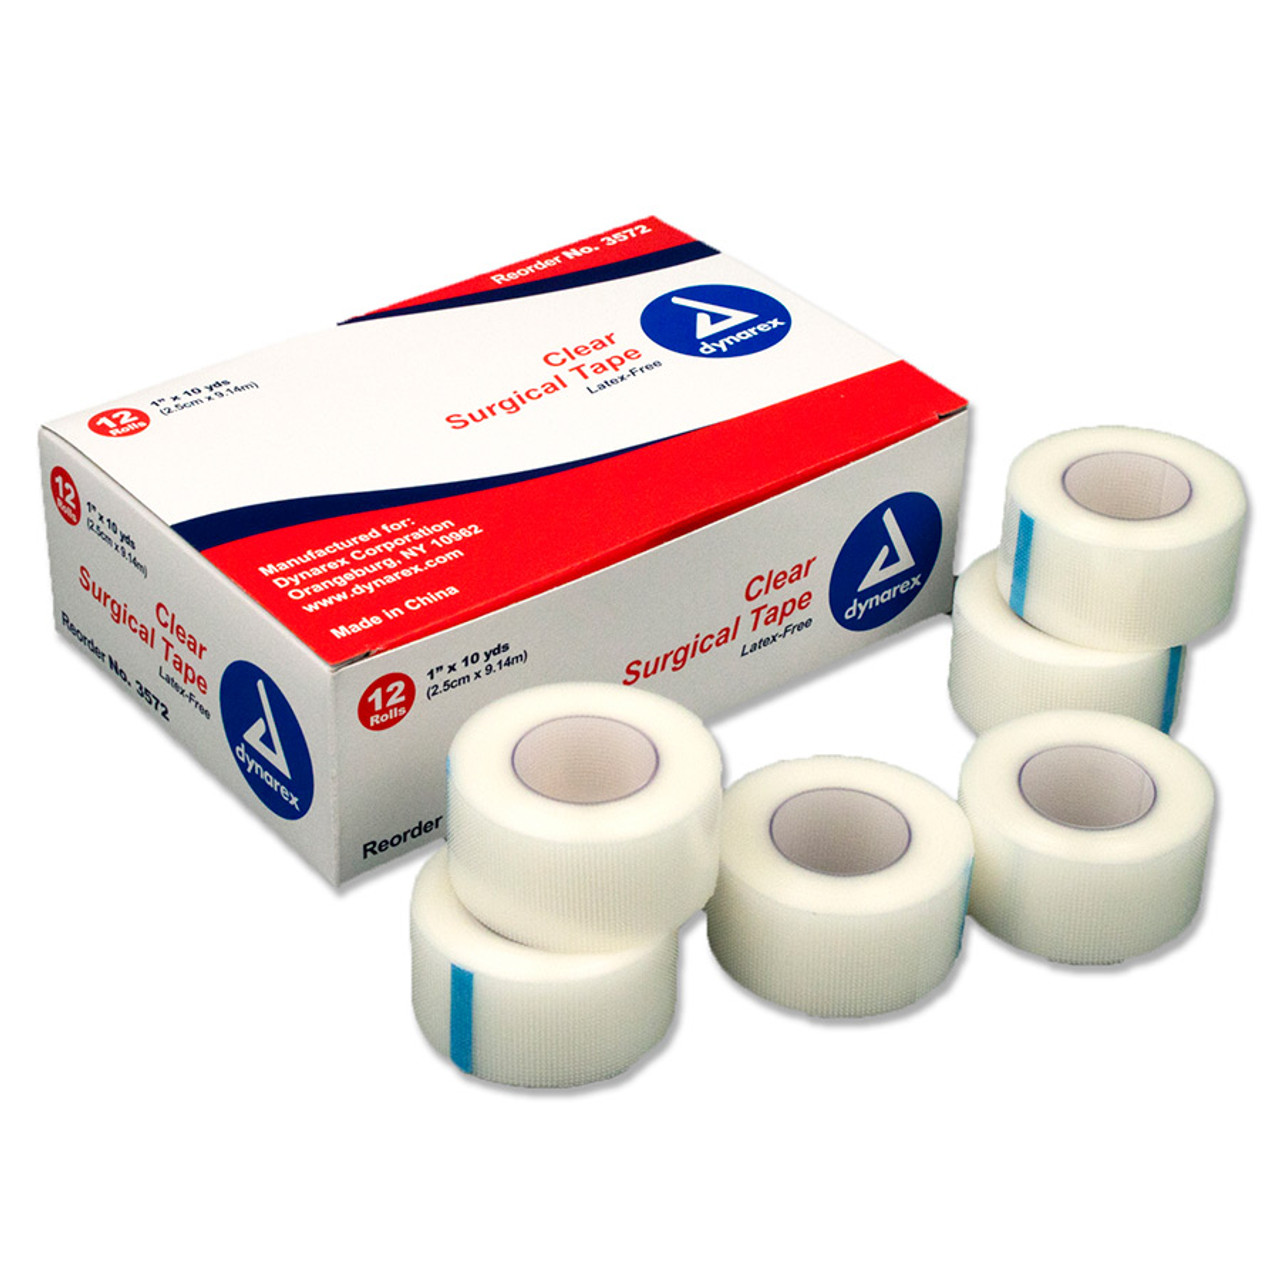 Dynarex Porous Tape - Adhesive Medical Tape for Wound Care - Non Sterile,  Easy to Tear, No Natural Rubber Latex - White, 1 x 10 Yards Per Roll, 1